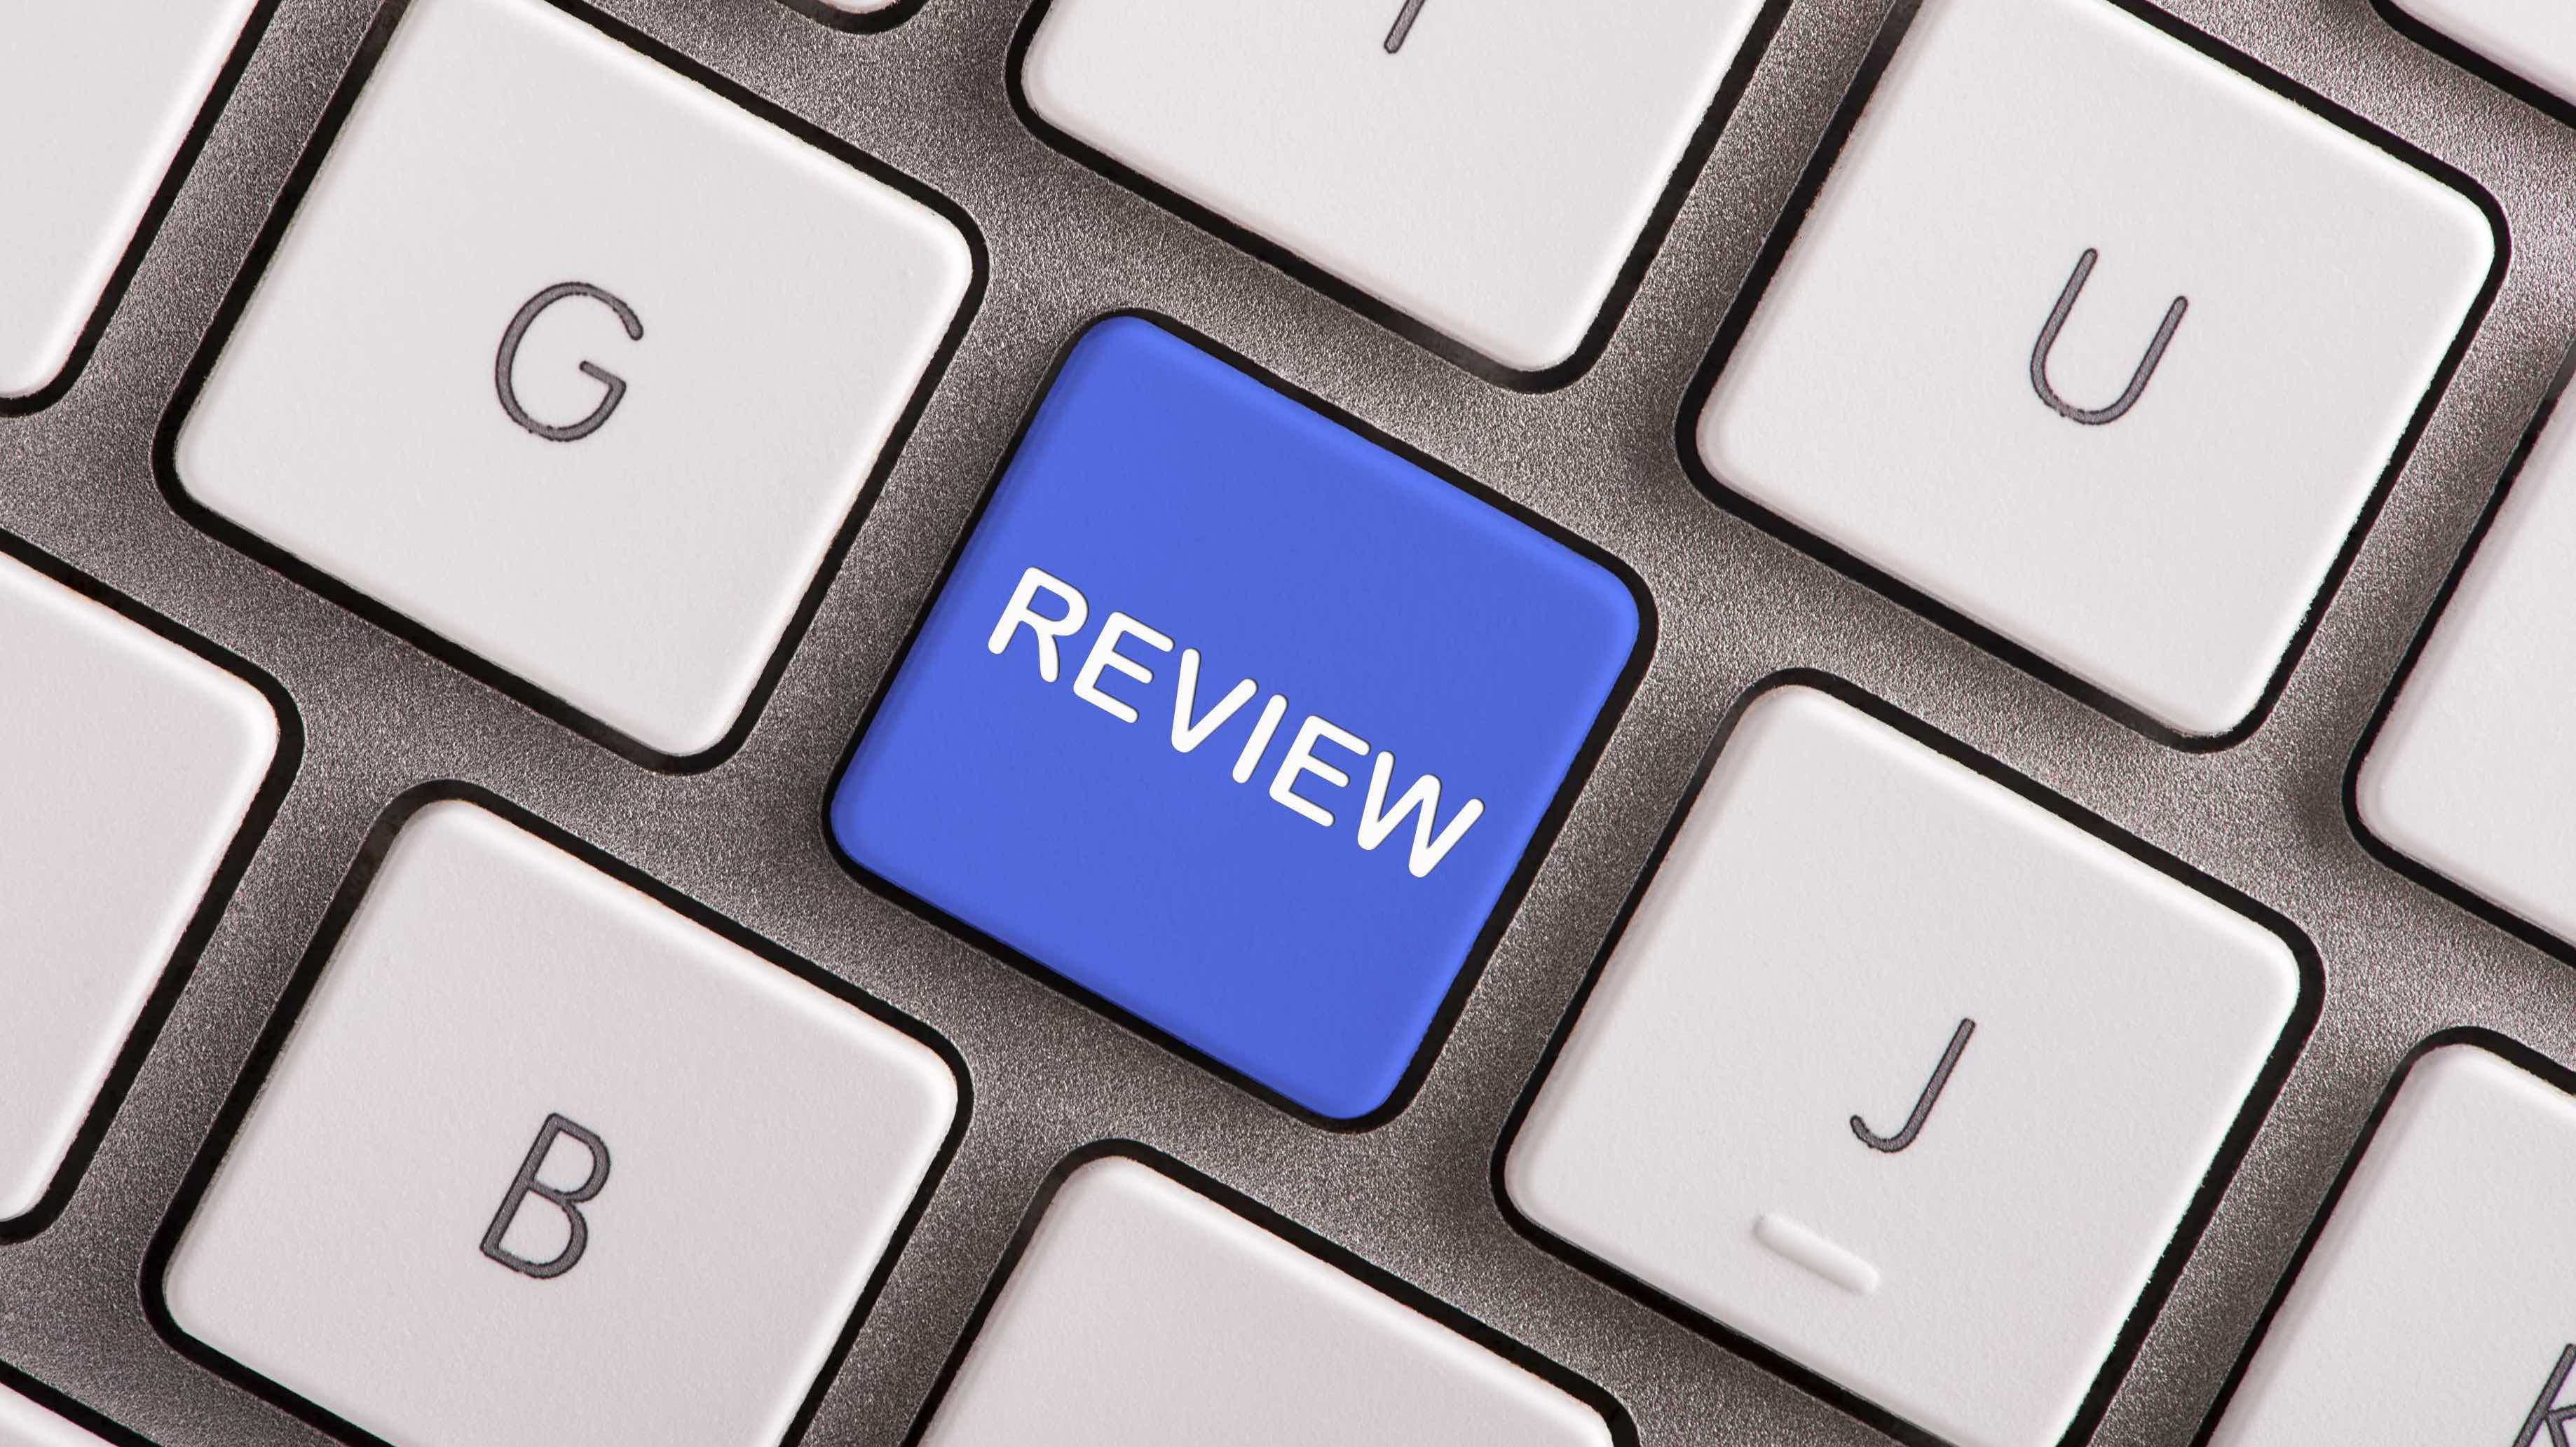 Review scores are important and every website needs them